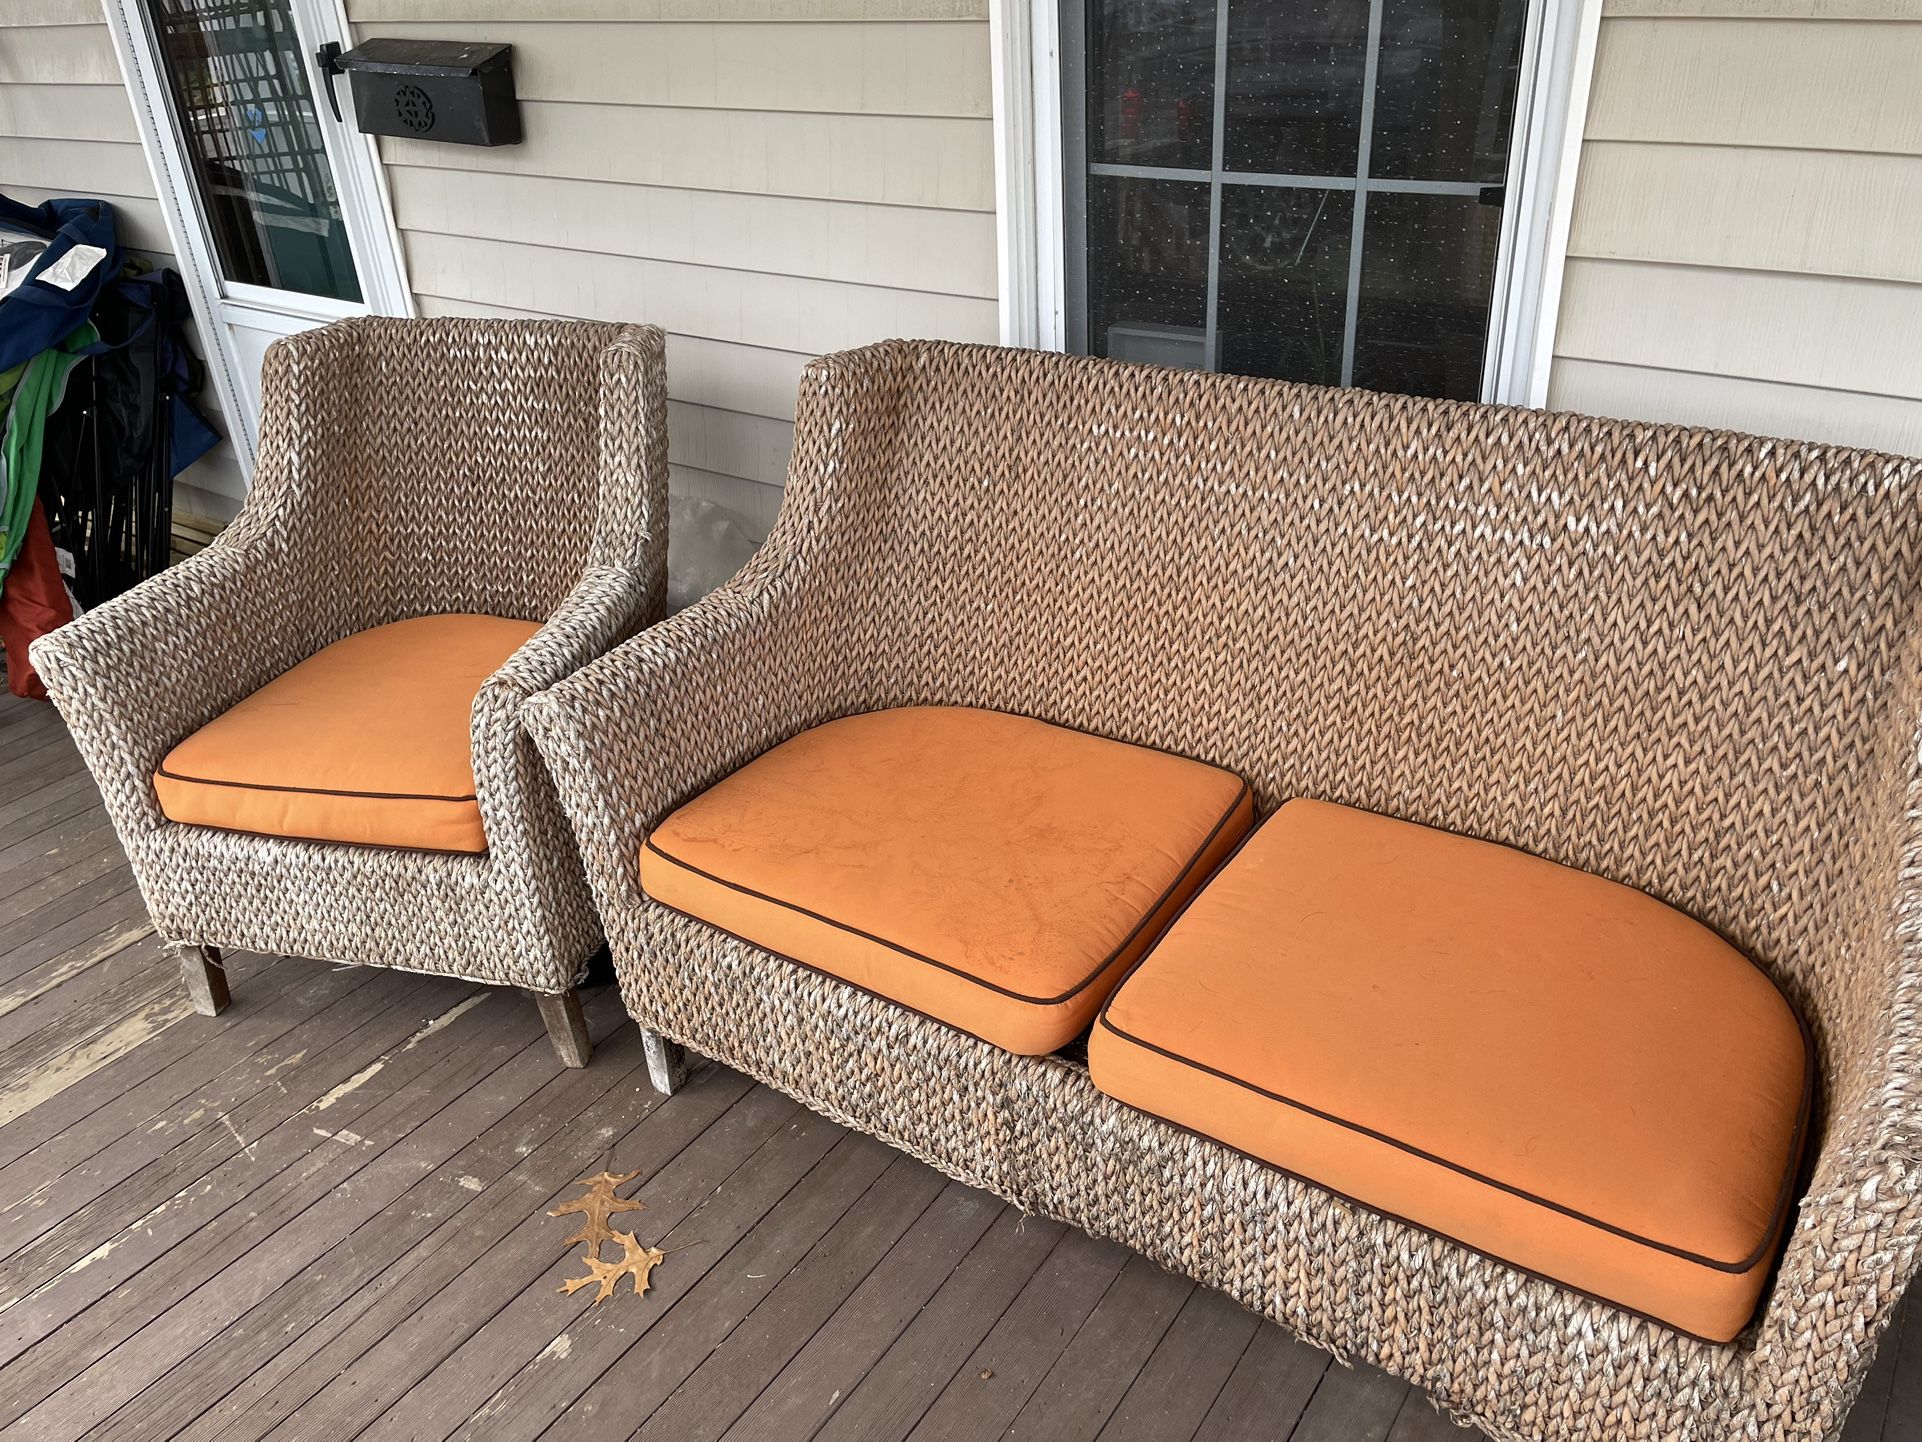 Outdoor Wicker Love Seat and Chair with Cushions